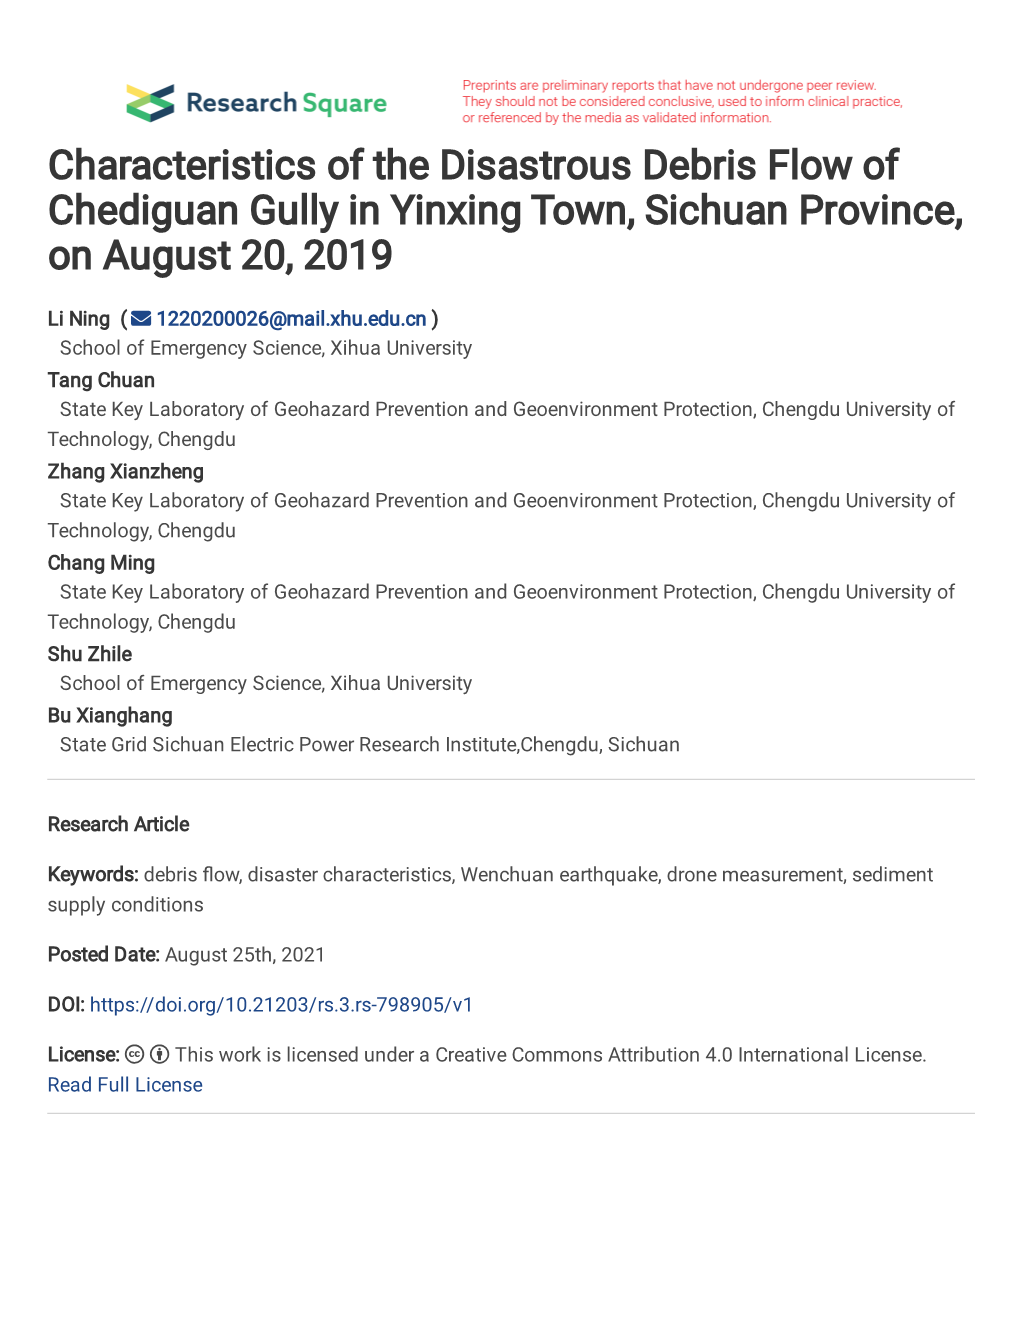 Characteristics of the Disastrous Debris Flow of Chediguan Gully in Yinxing Town, Sichuan Province, on August 20, 2019